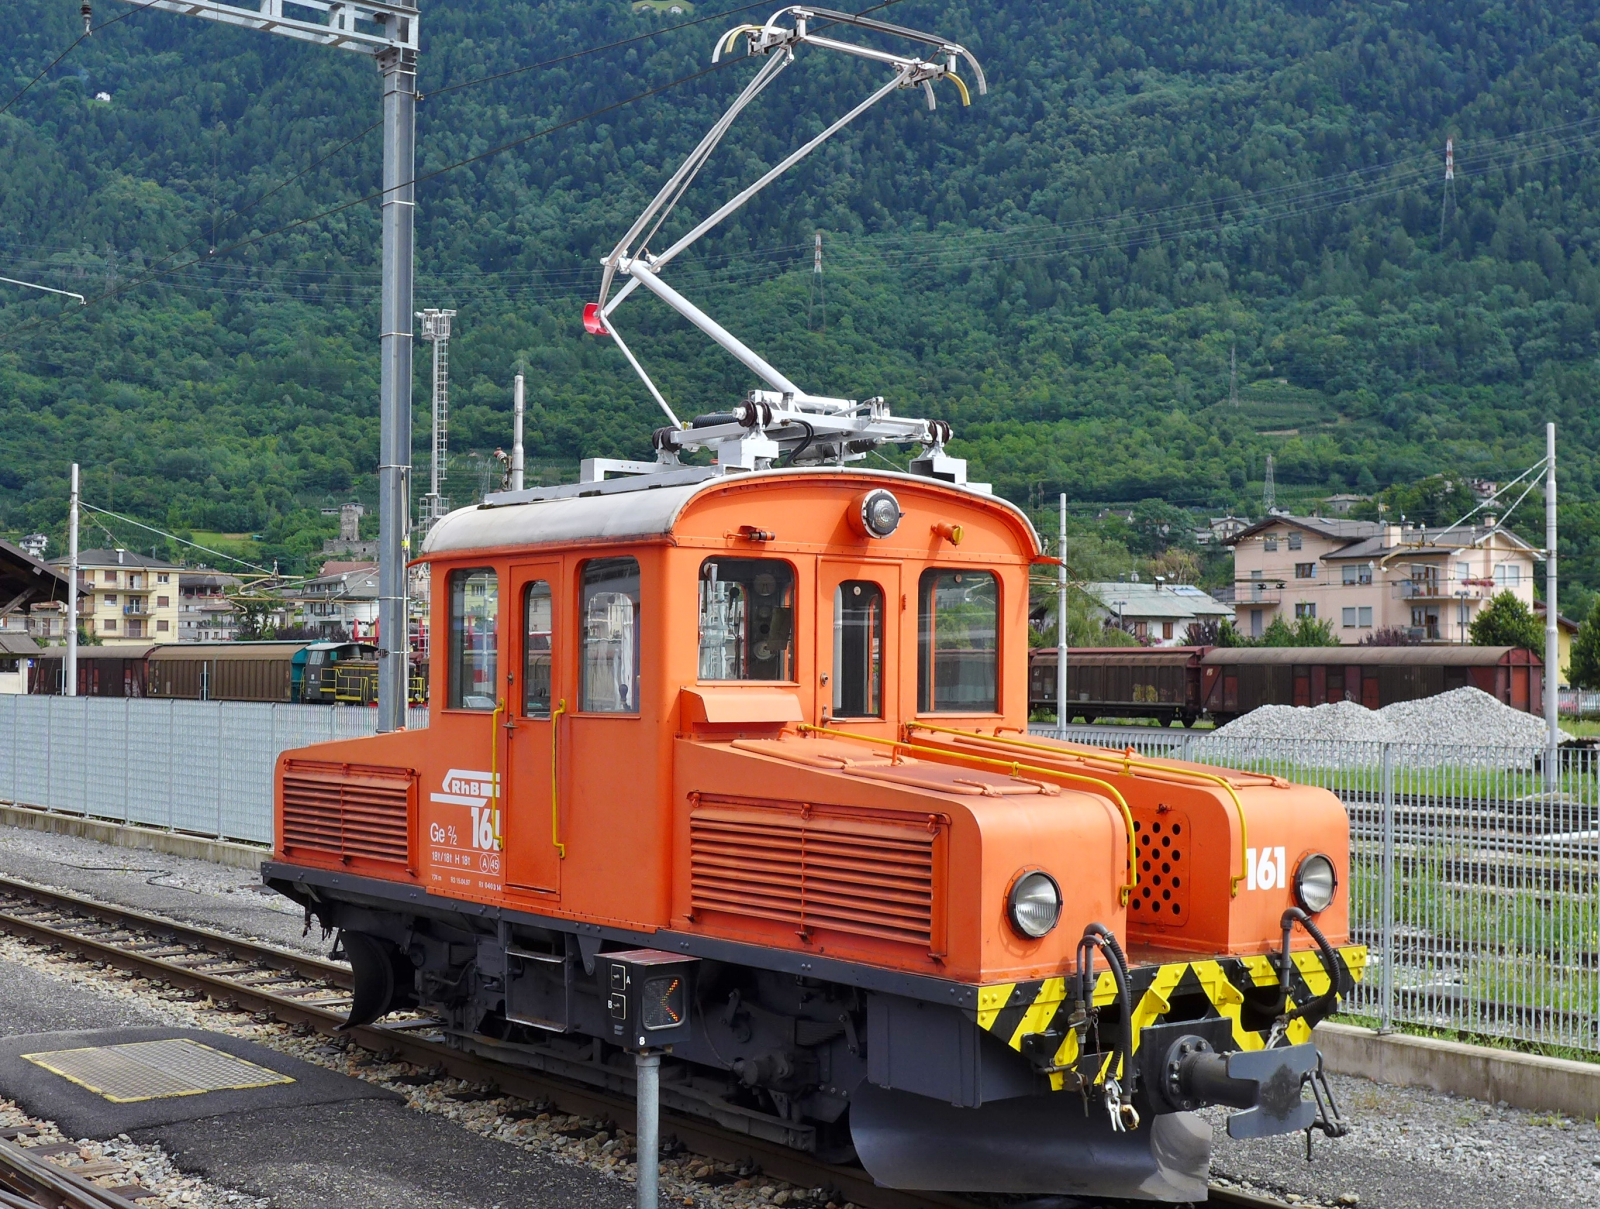 No. 161 in July 2014 in Tirano